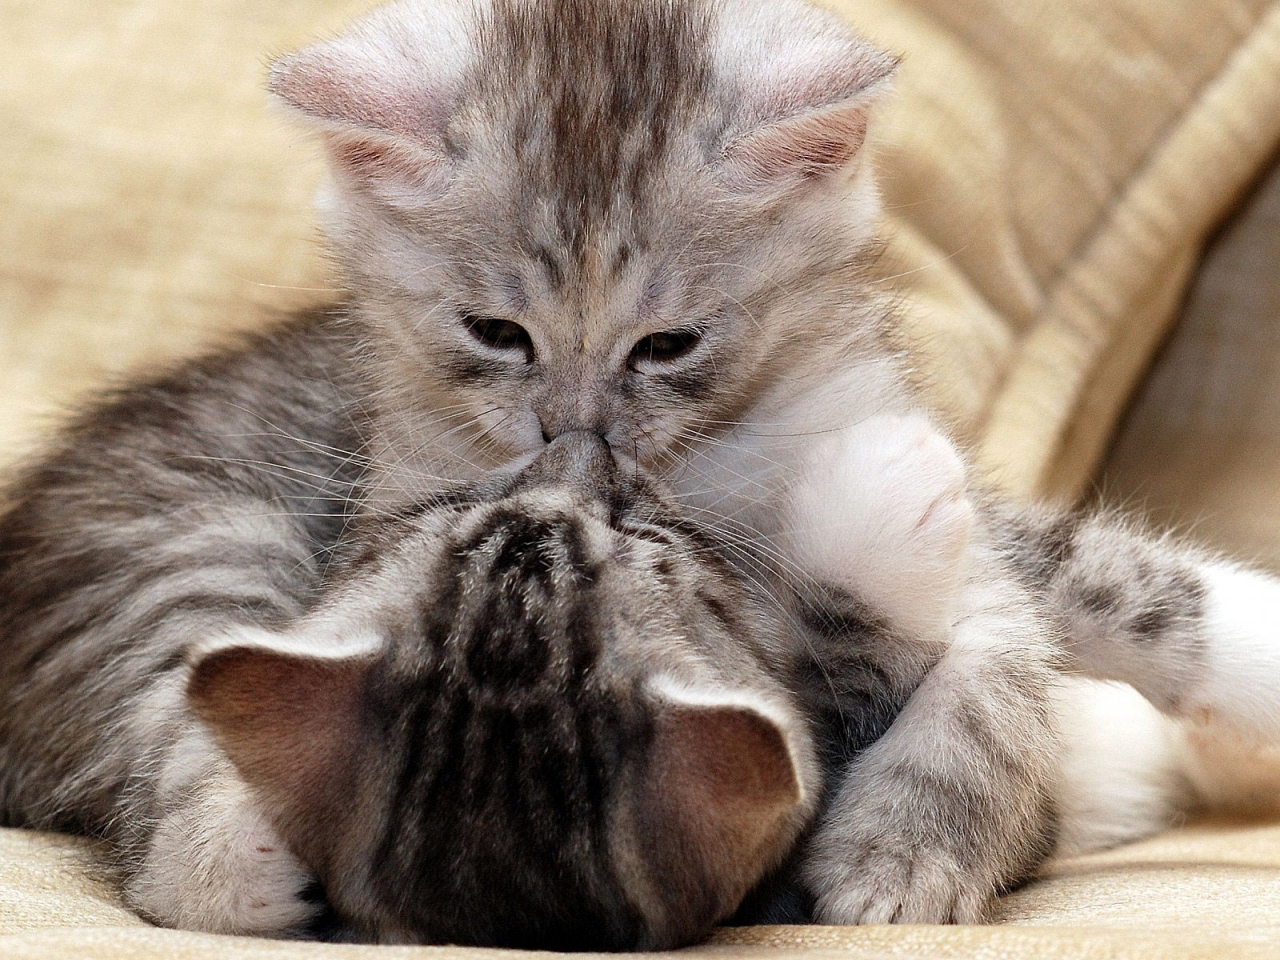 Kitty Kiss for 1280 x 960 resolution